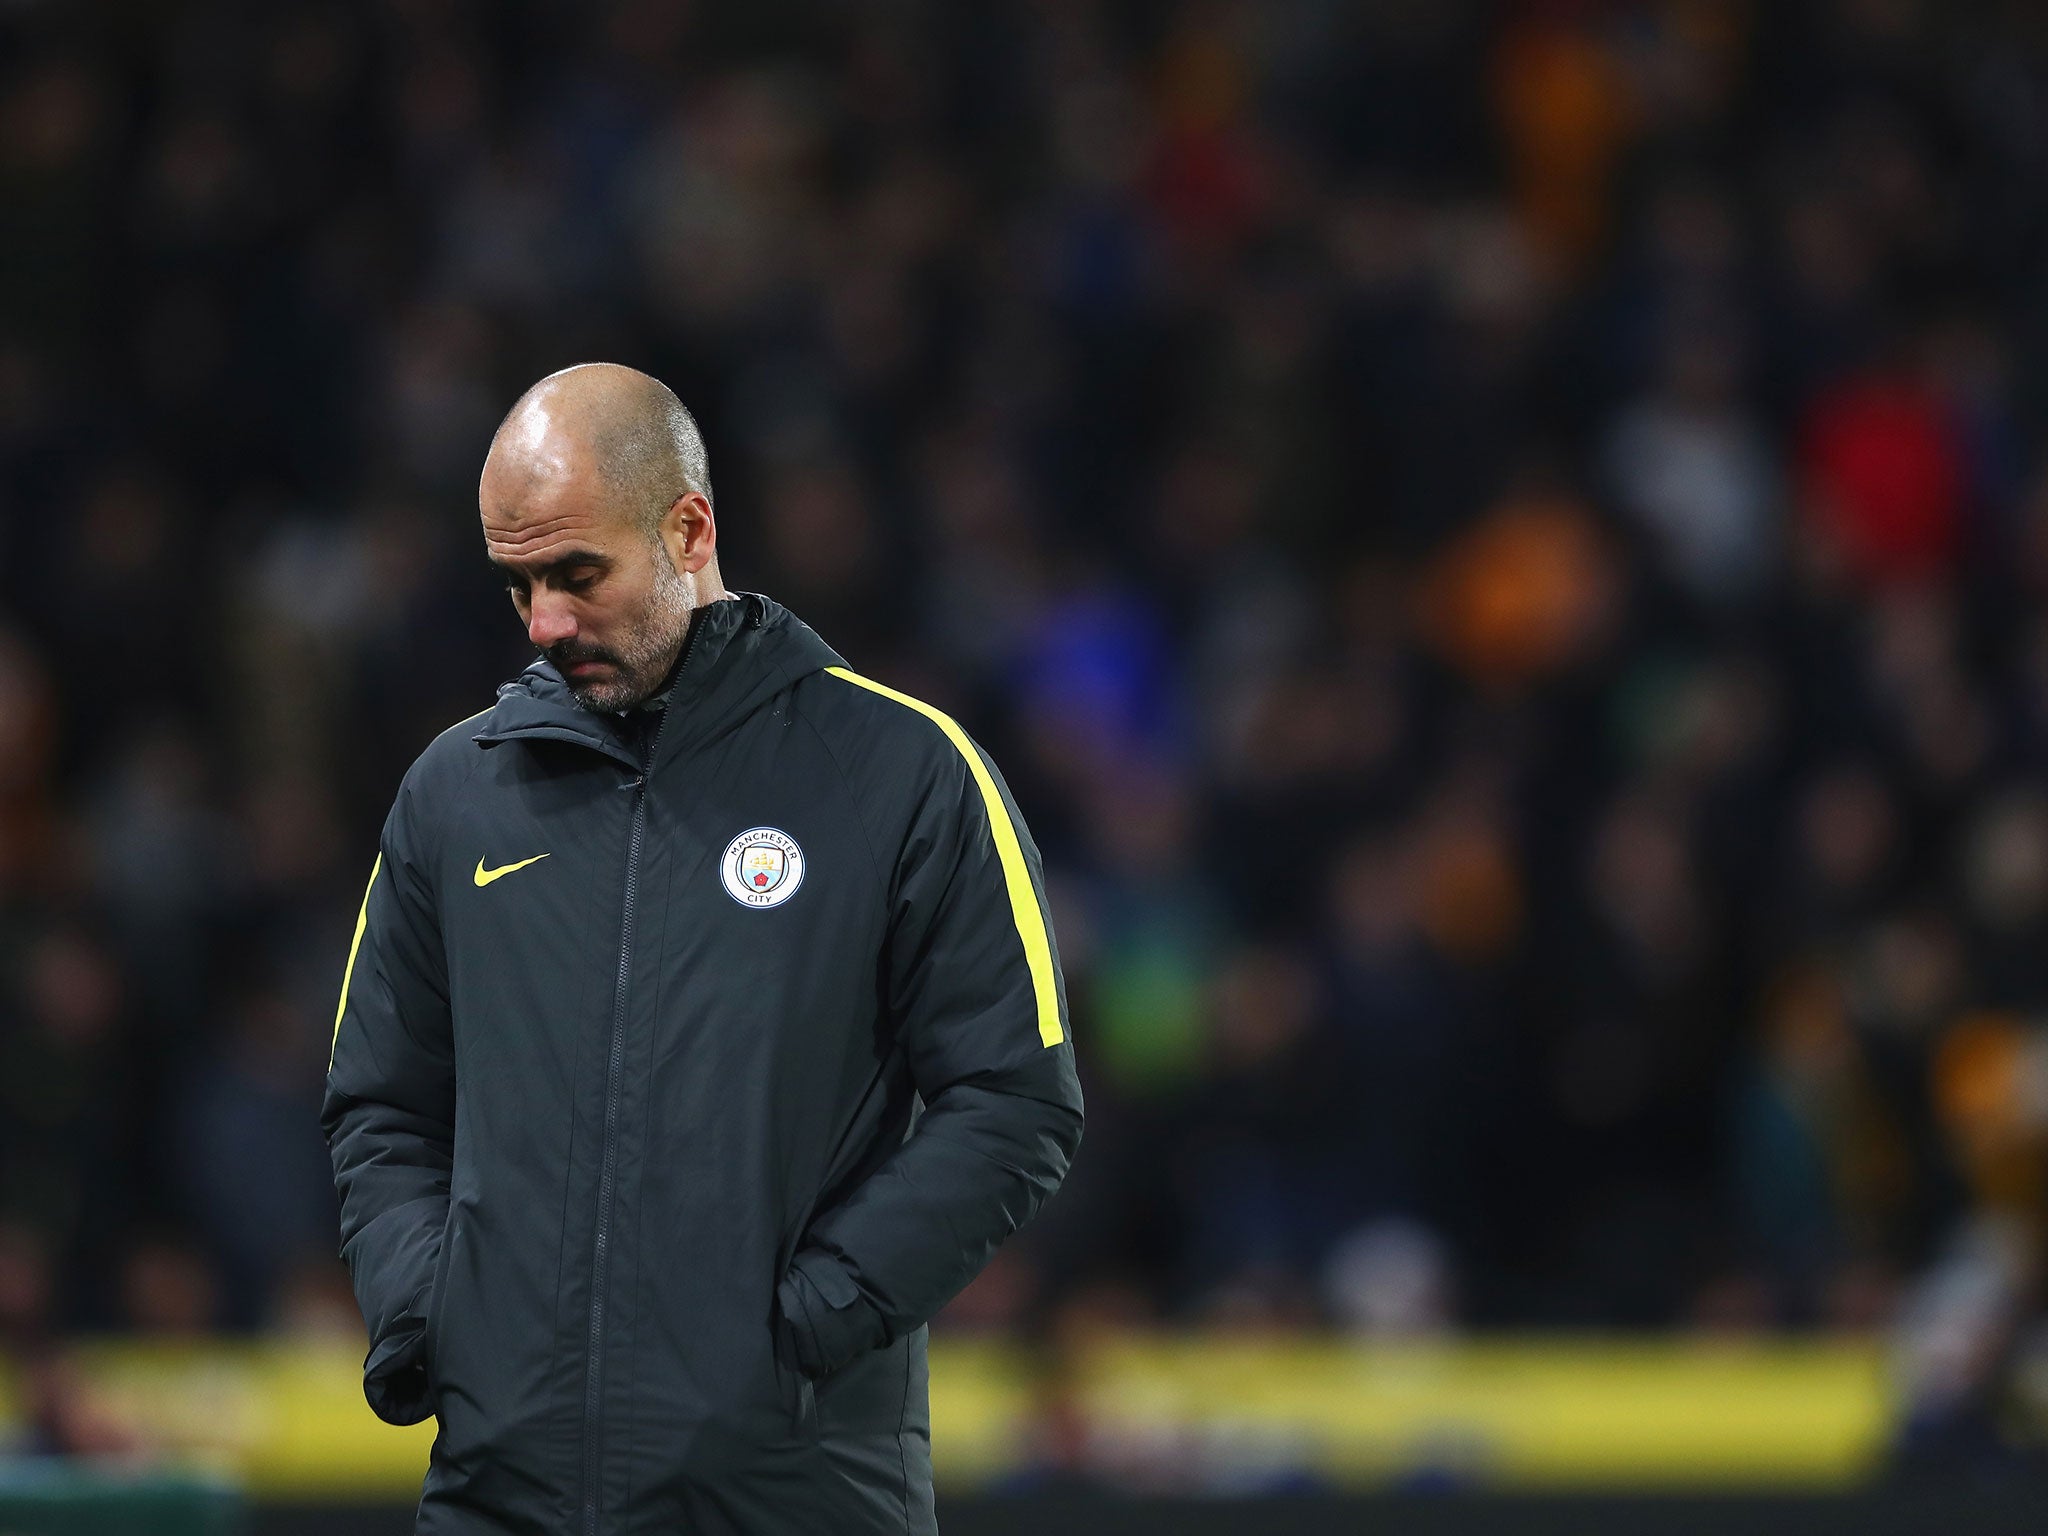 Pep Guardiola and Man City are struggling for form and consistency